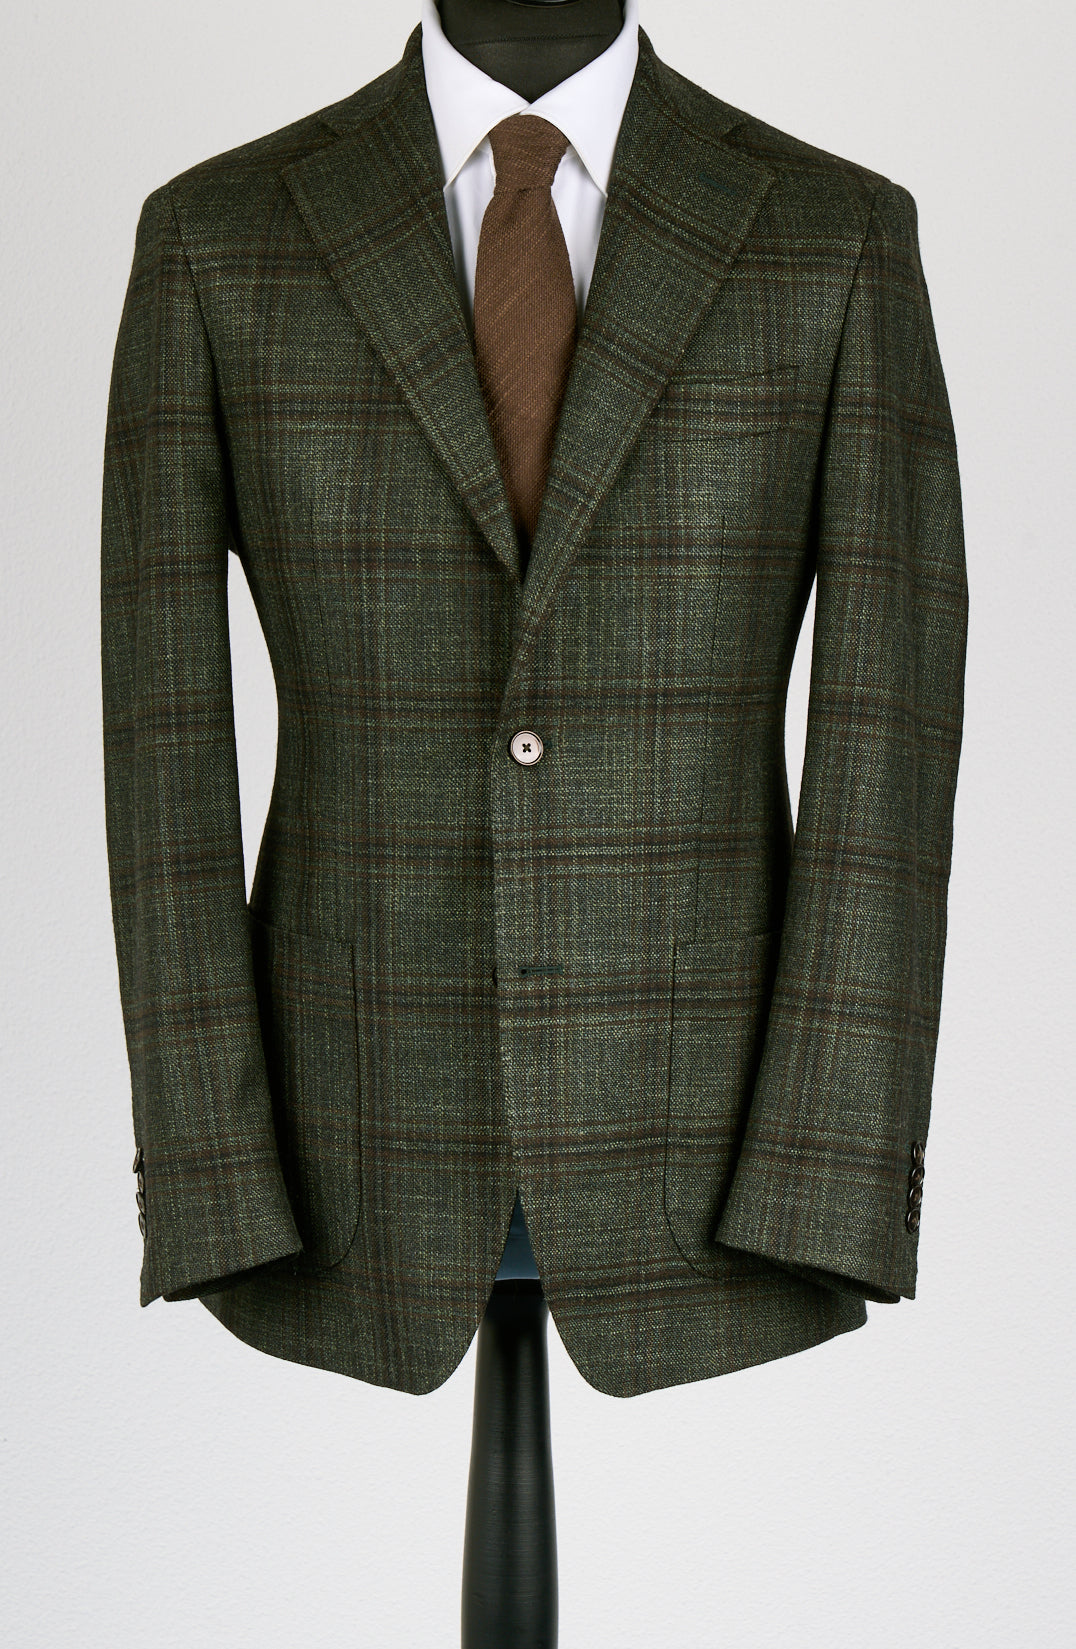 New SUITREVIEW Elmhurst Dark Green Check Wool, Silk, Cashmere Luxury Blazer - Size 38R and 42R